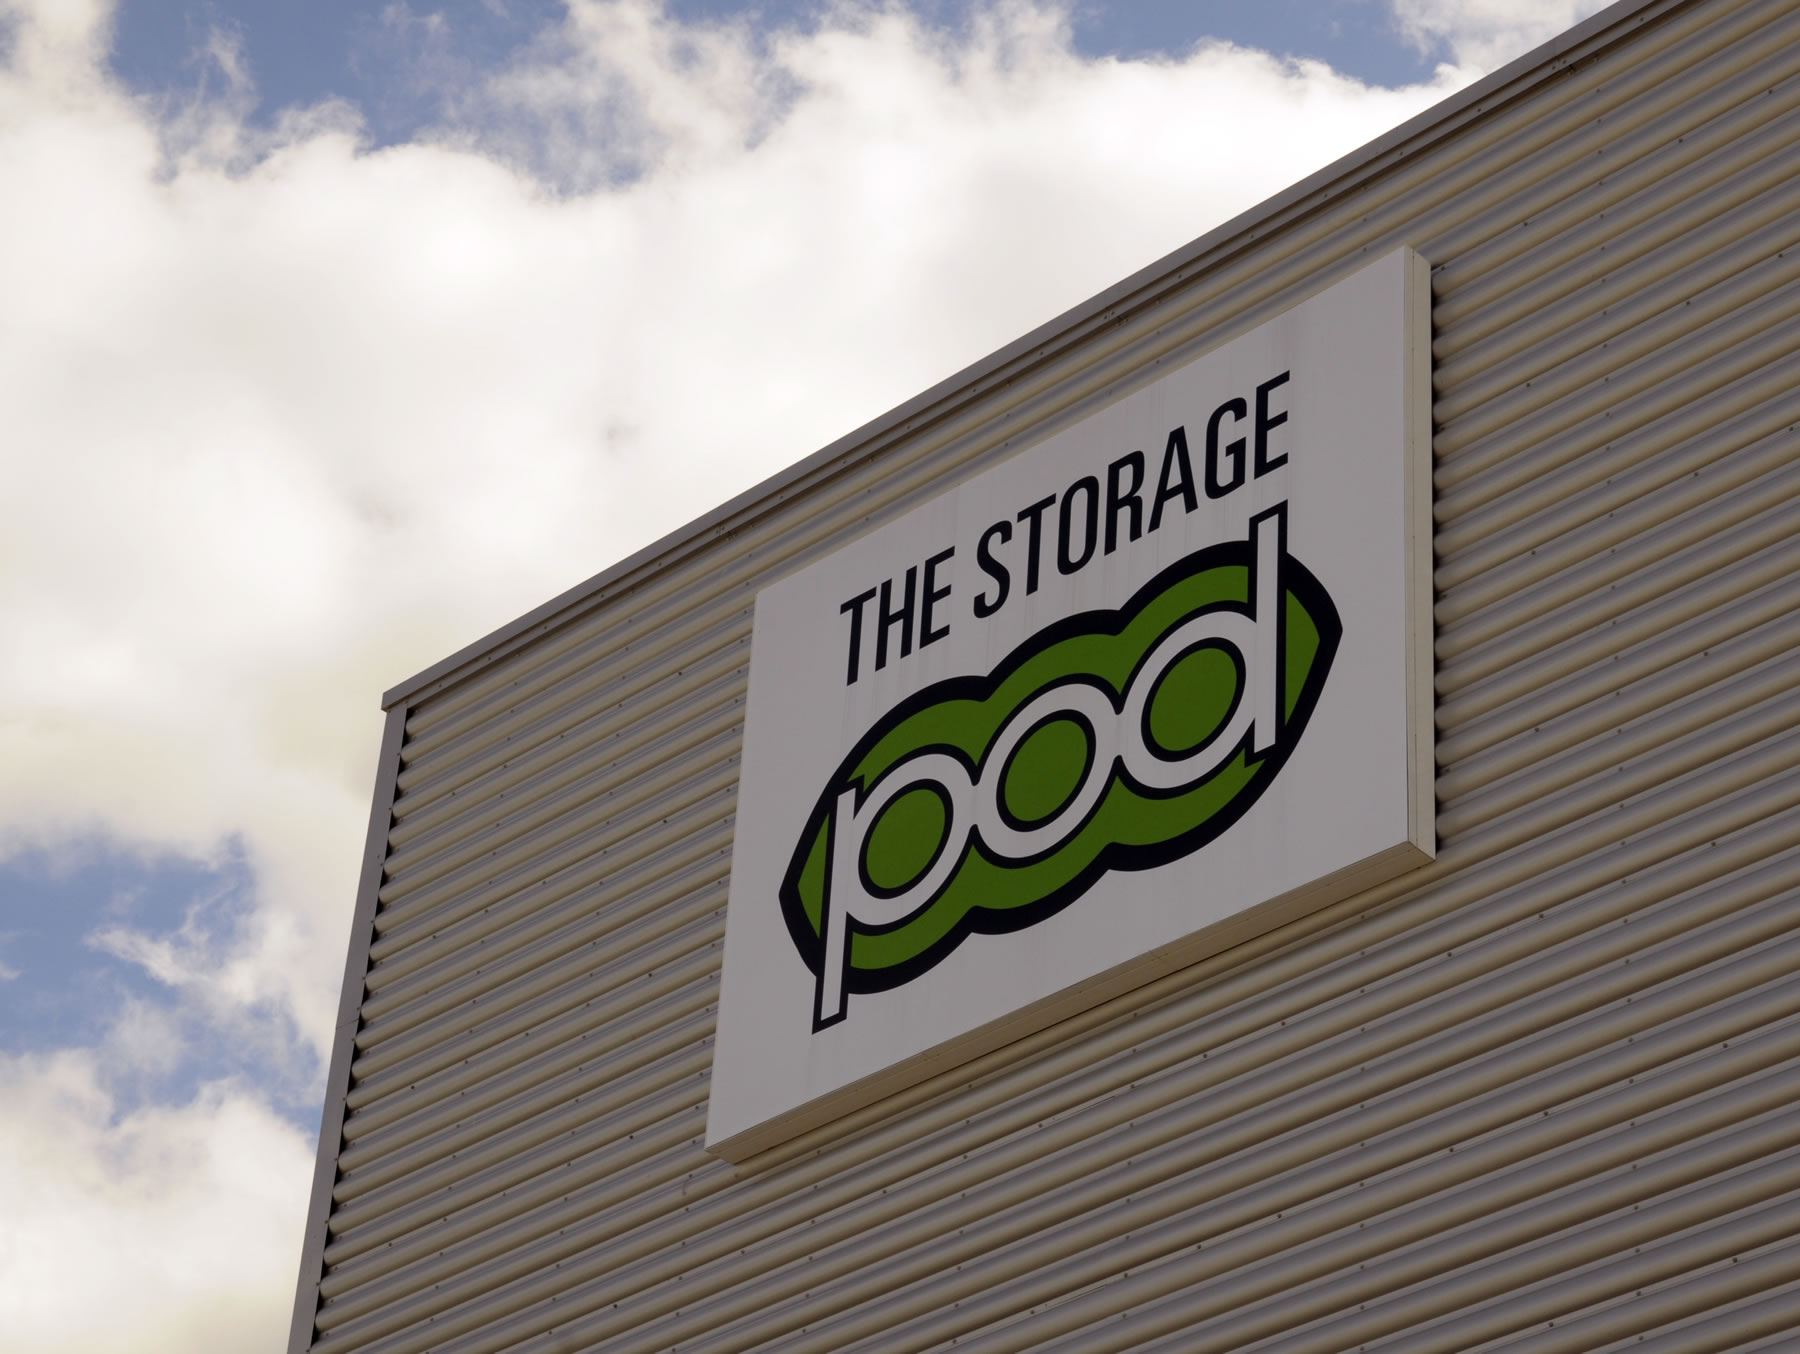 Storage Pod Brooklands Facility - Self Storage and other Services for Businesses and Families